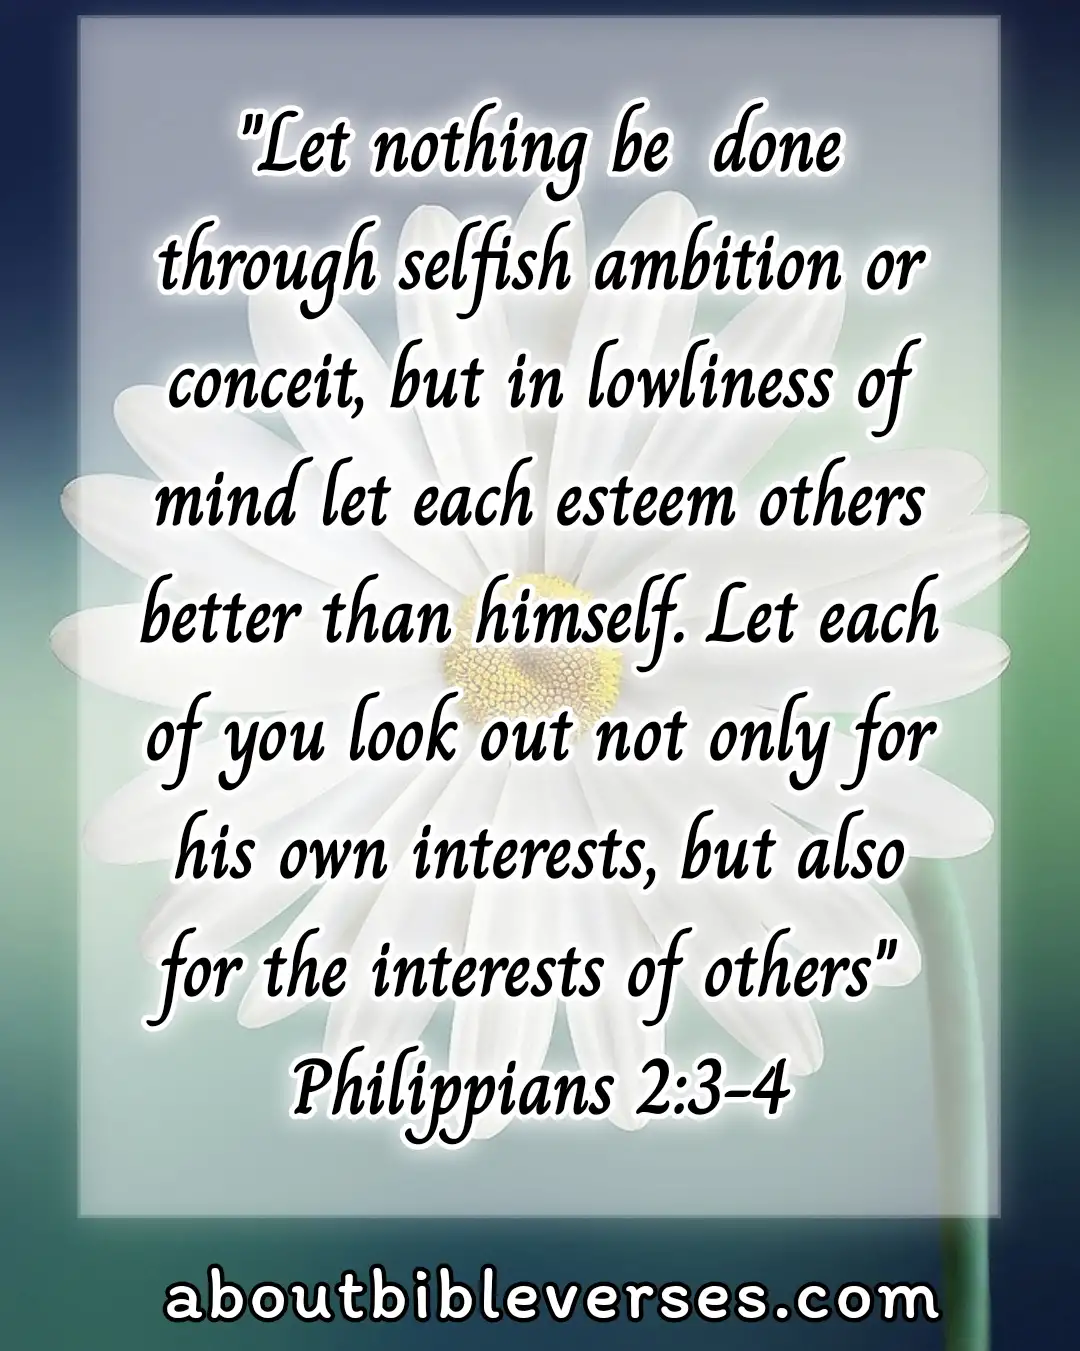 Bible Verses About Unity And Working Together (Philippians 2:3-4)